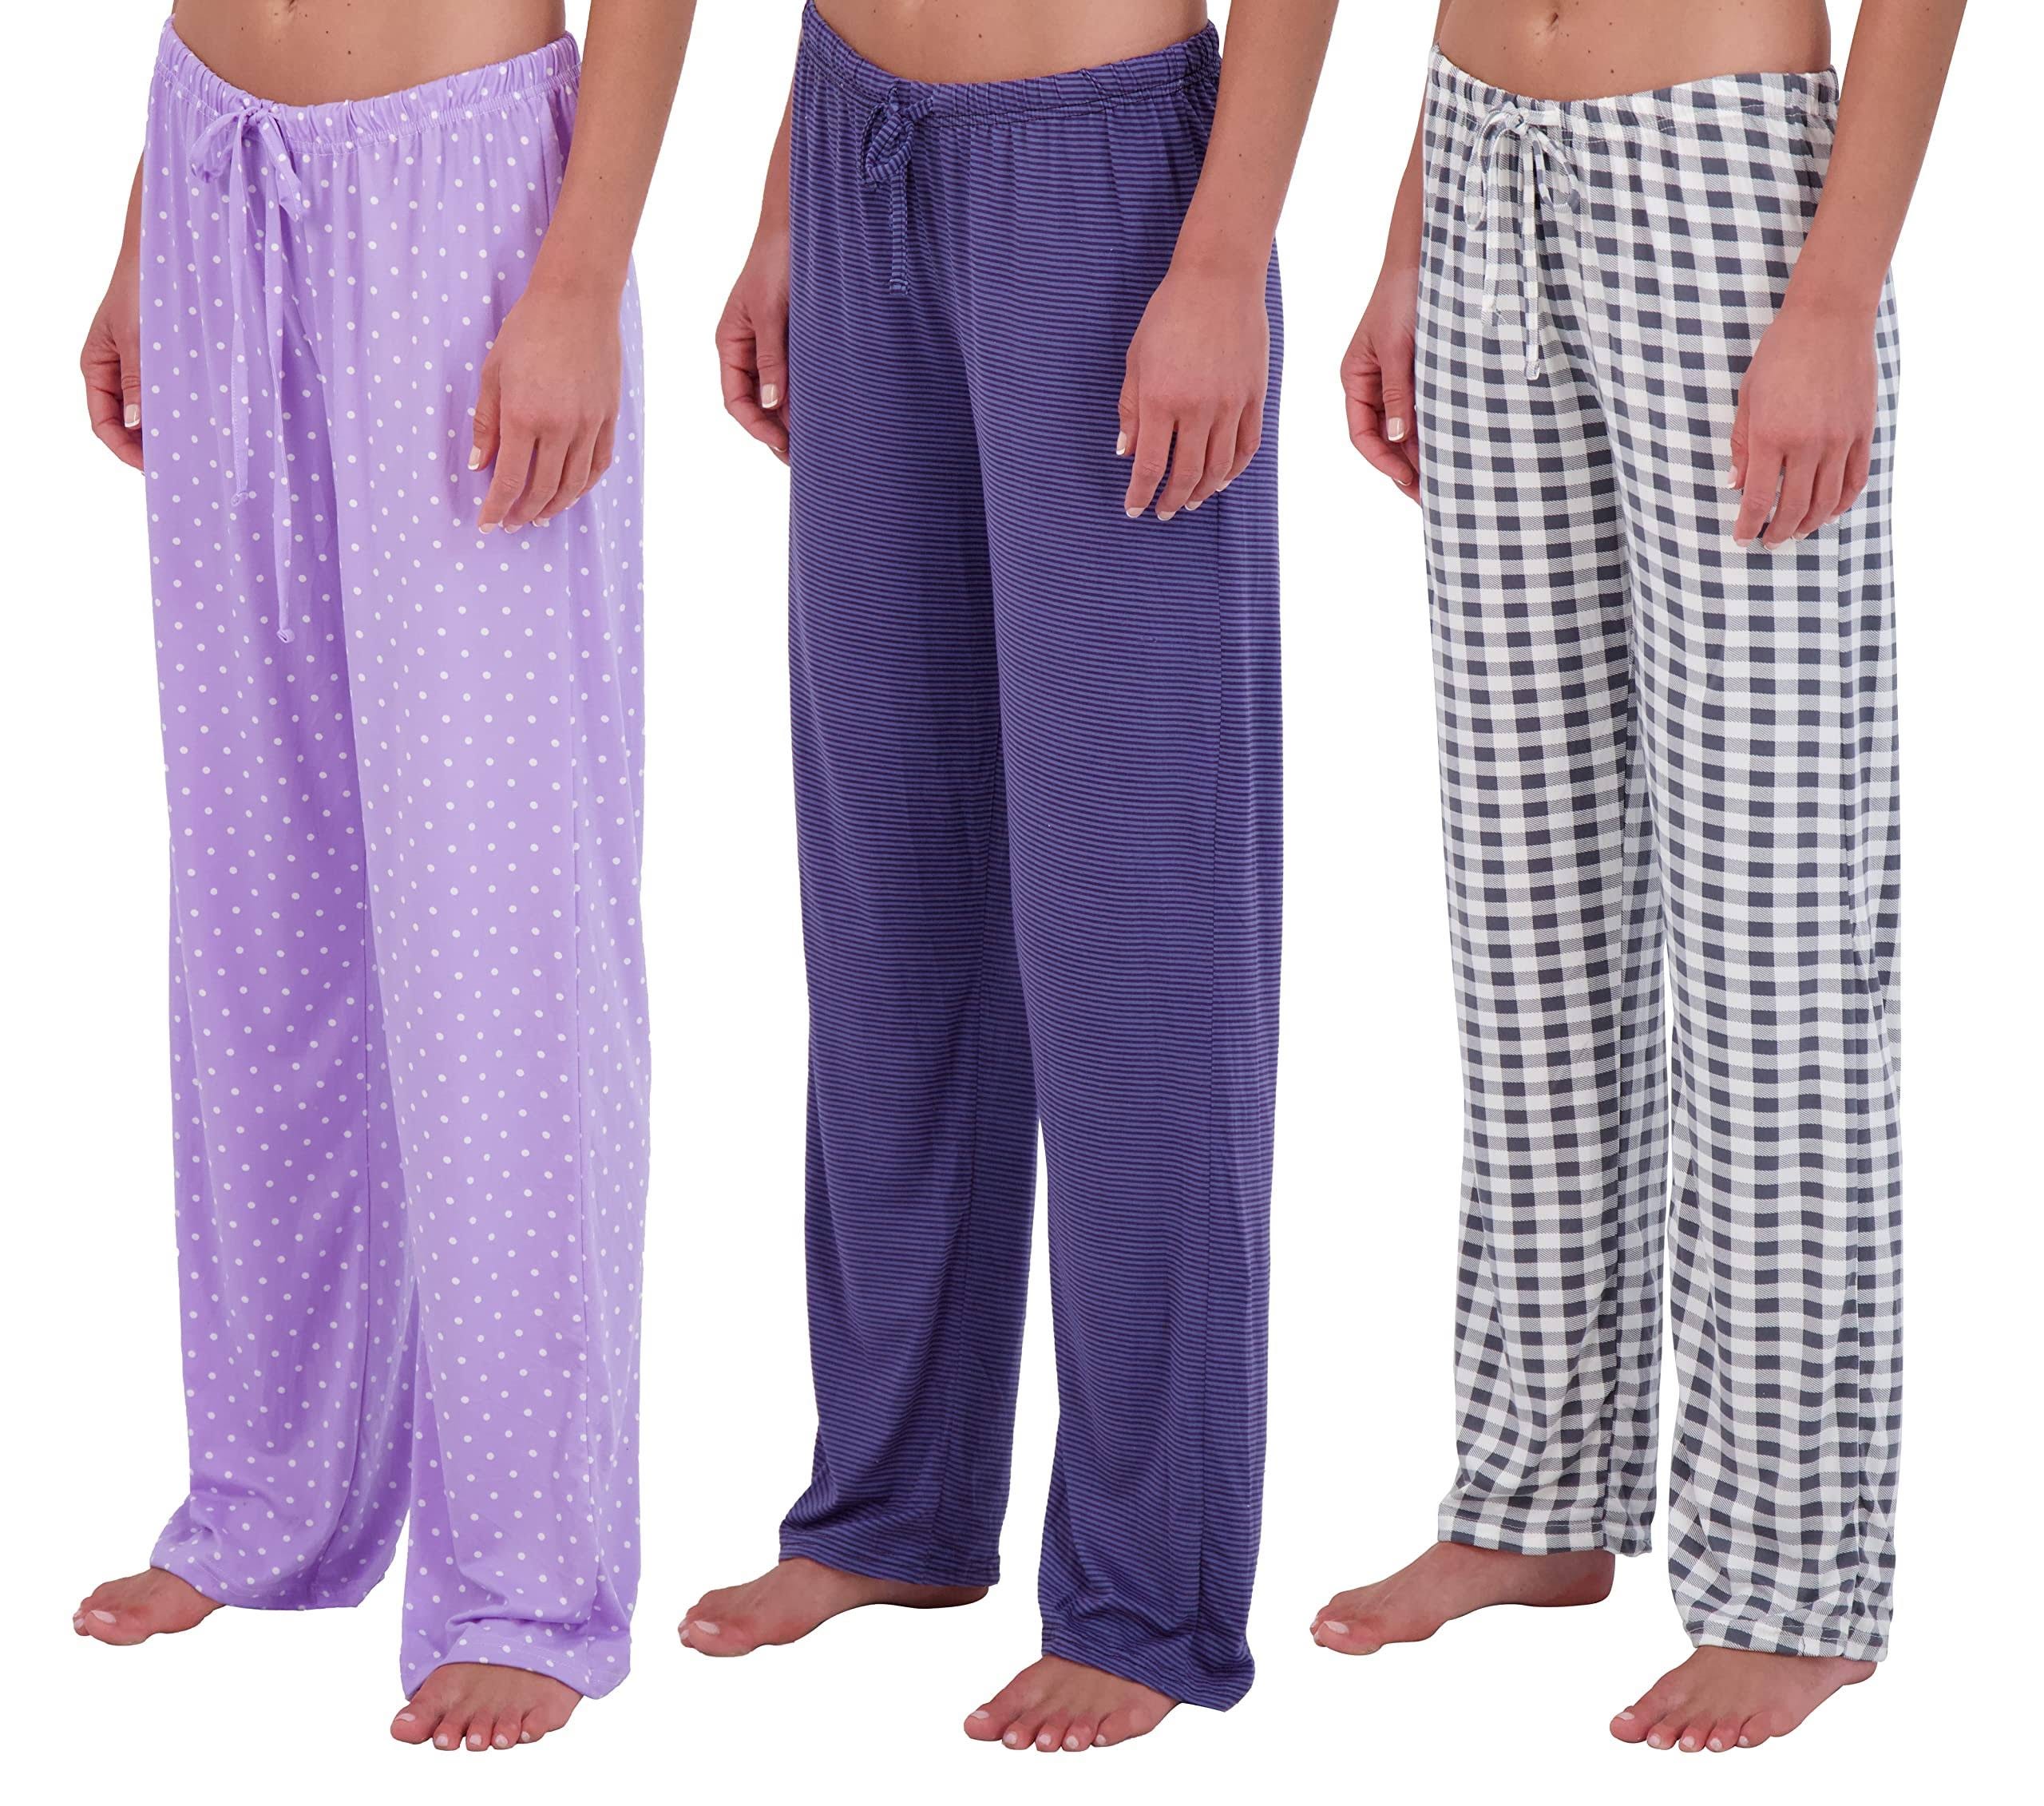 Ultra-Soft Comfy Lounge Pants for a Cozy Sleepwear Experience | Image